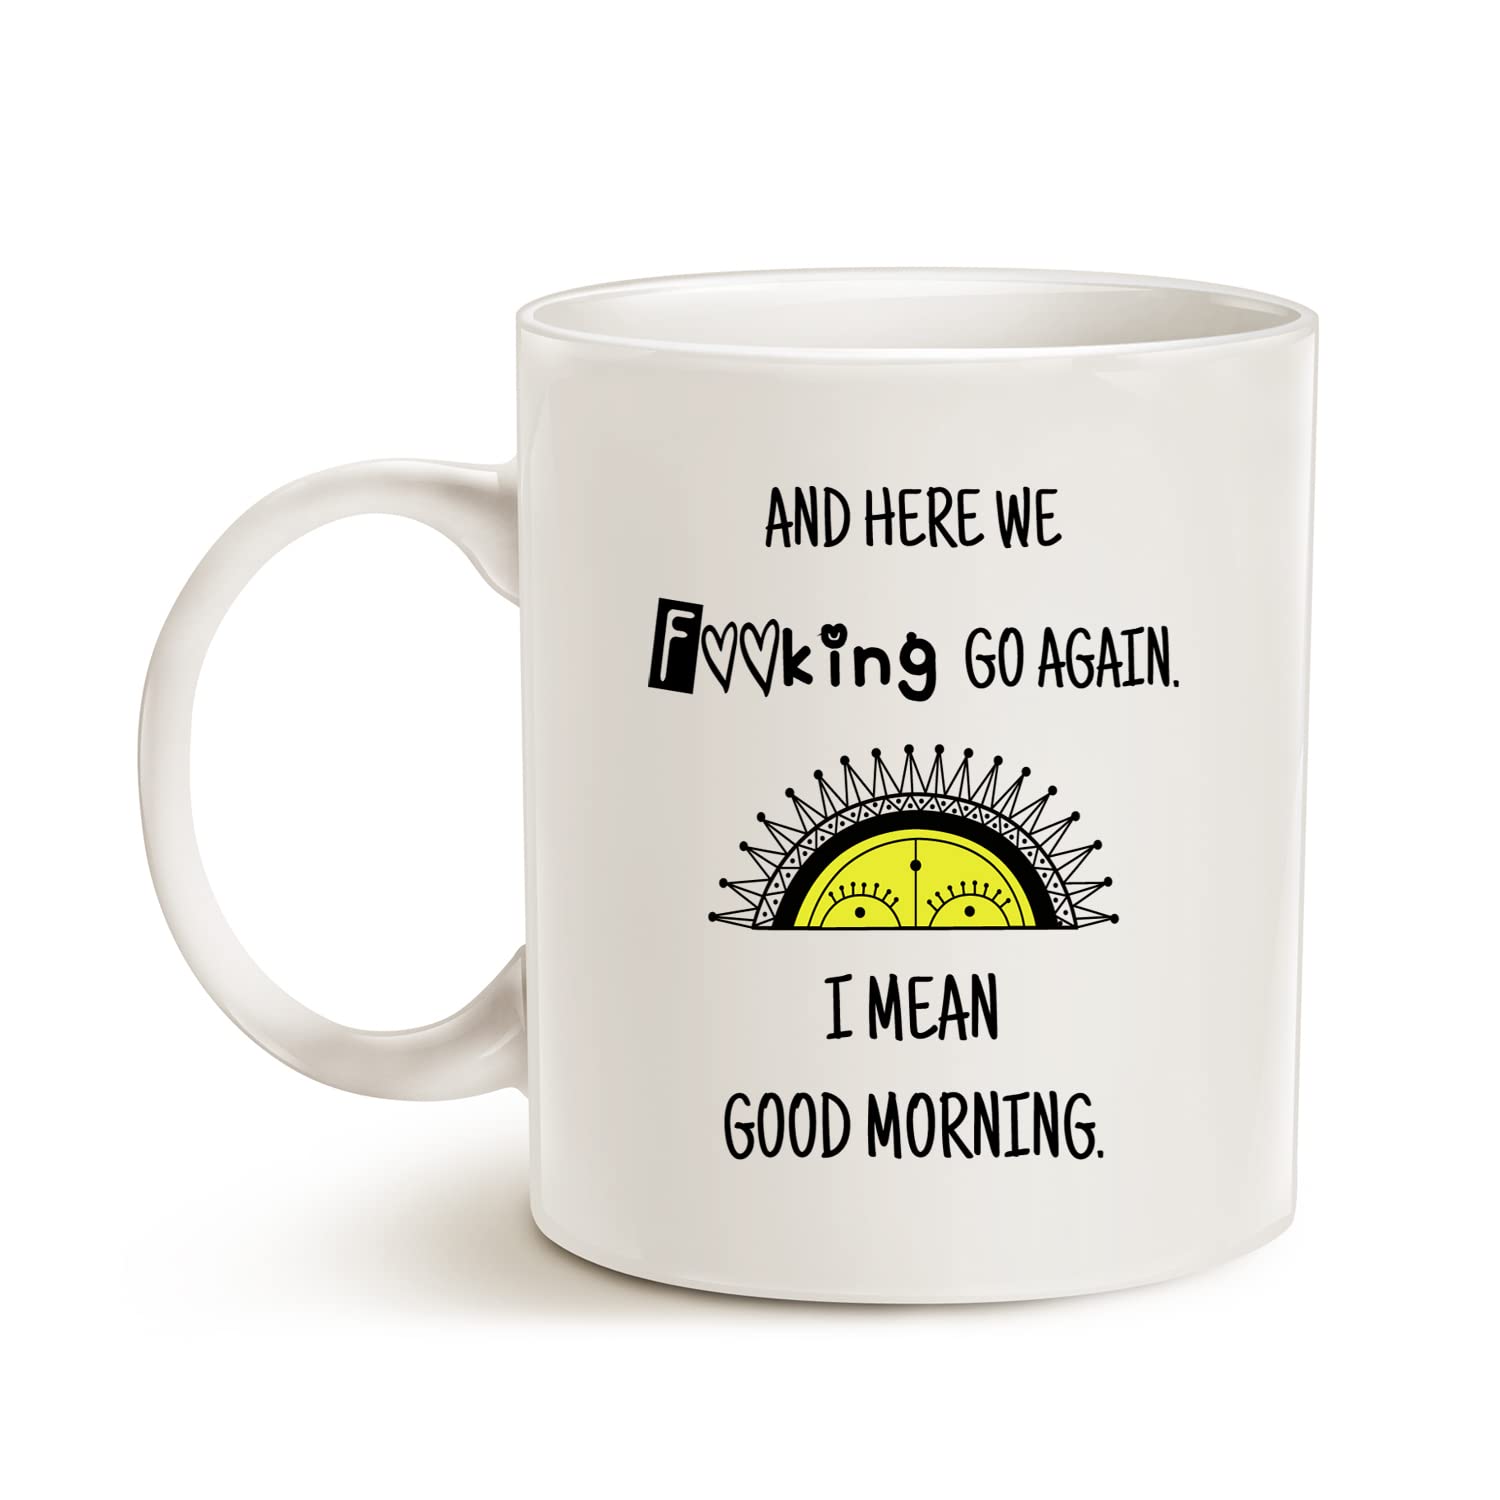 MAUAG Funny Gag Mug - Here We Go Again. I Mean Good Morning Sarcastic Coffee Mug for Mom Mother Women, Mother's Day or Christmas Gifts Cup White, 11 Oz